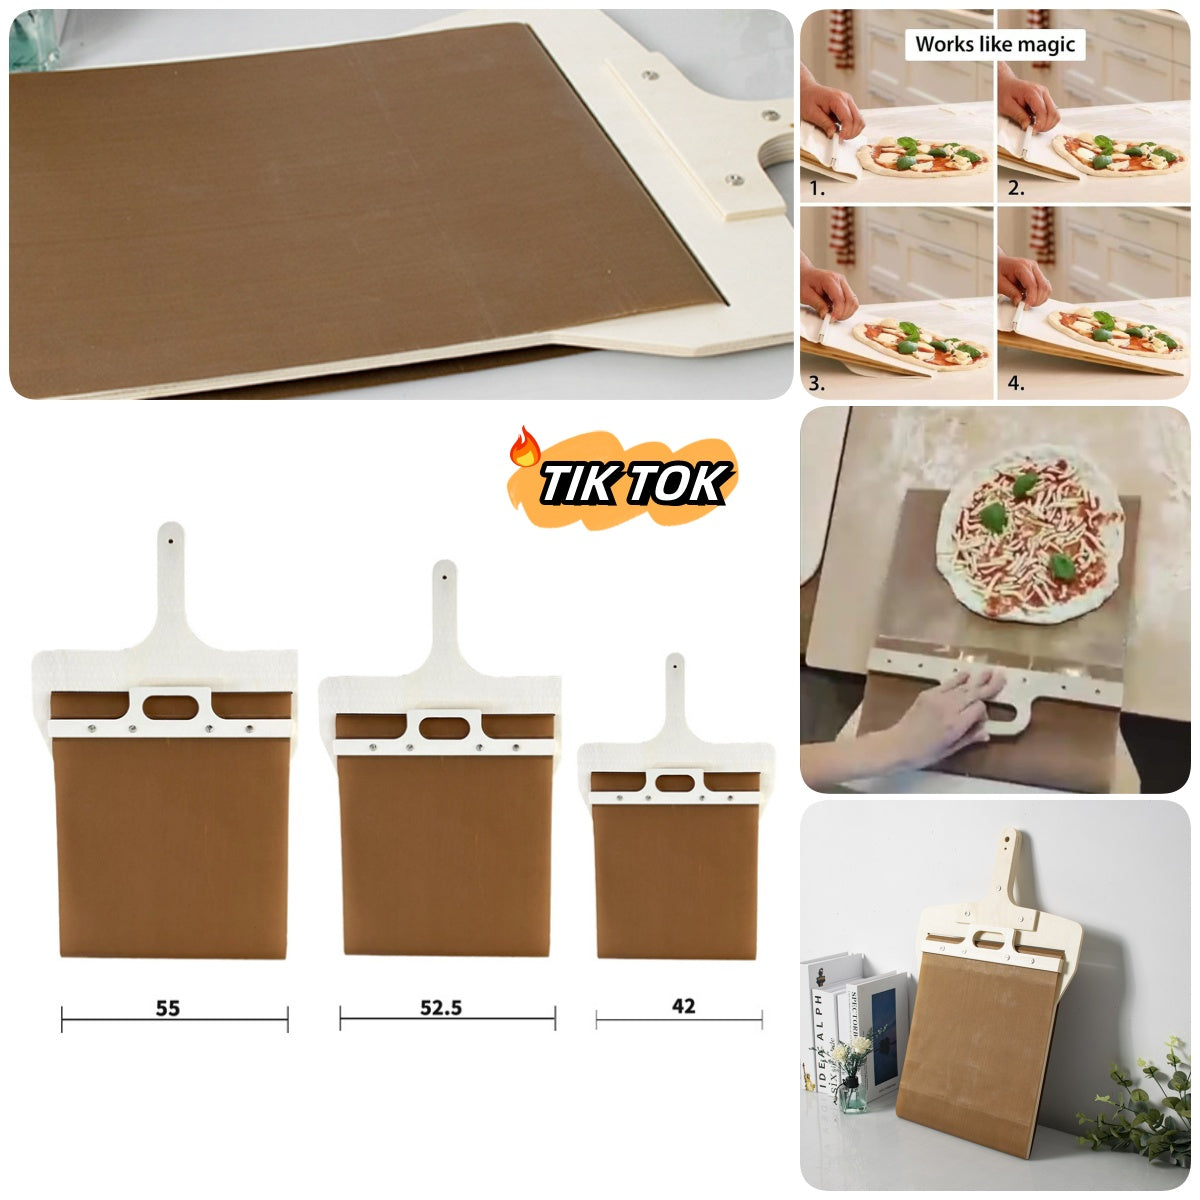 Collapsible Wooden Pizza Peel: This image showcases a collapsible wooden pizza peel, its folding handle making it convenient for storage. Its natural wood surface is ideal for sliding pizzas effortlessly into the oven.